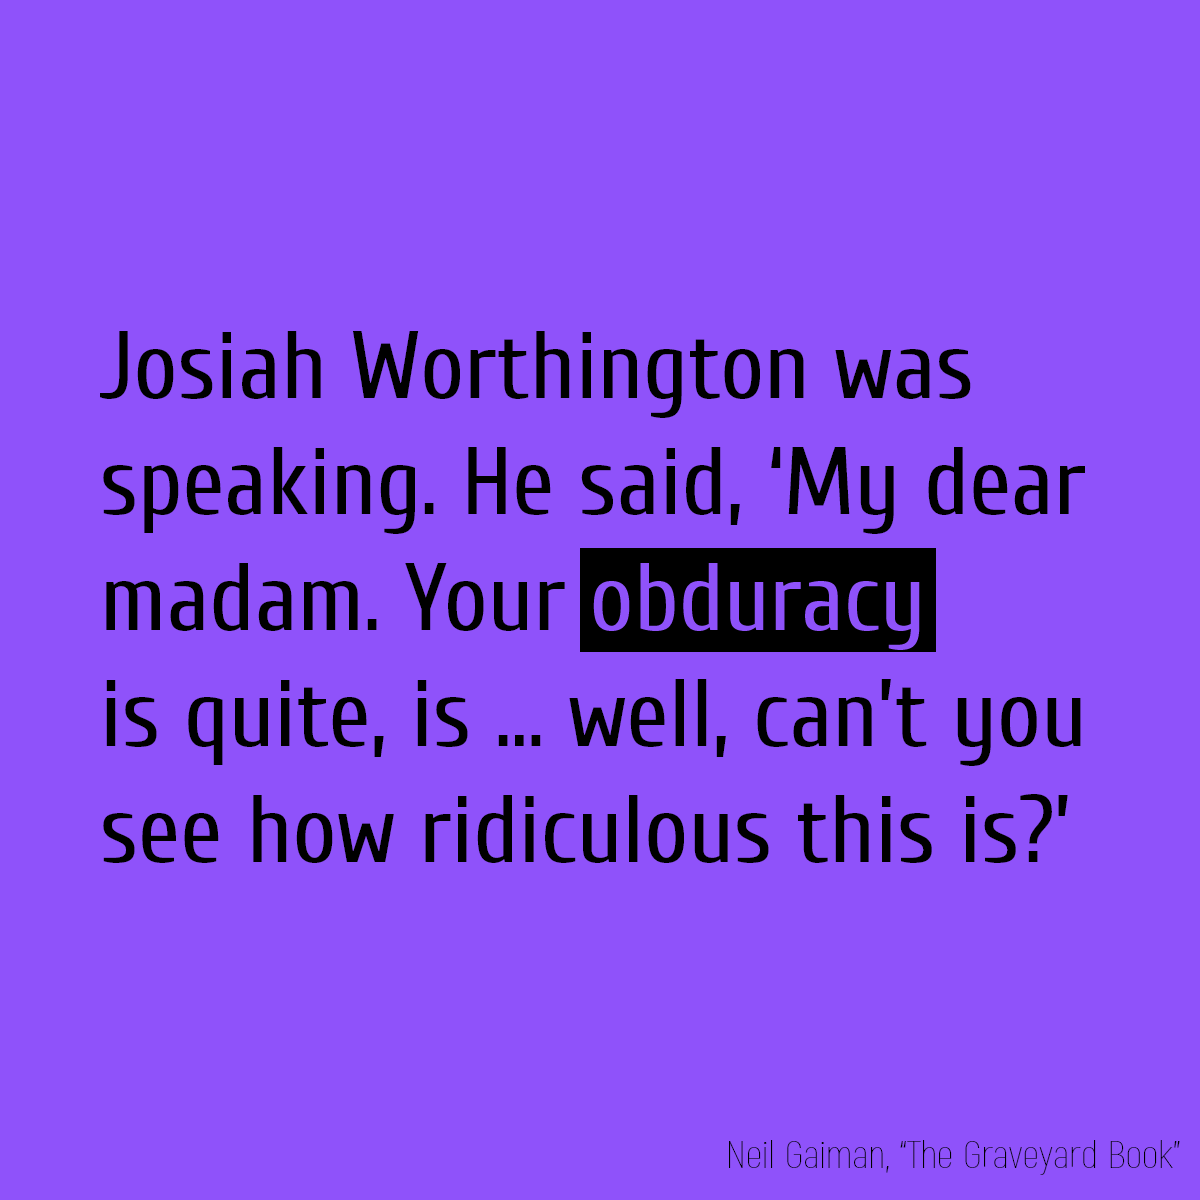 Josiah Worthington was speaking. He said, ‘My dear madam. Your **obduracy** is quite, is . . . well, can’t you see how ridiculous this is?’